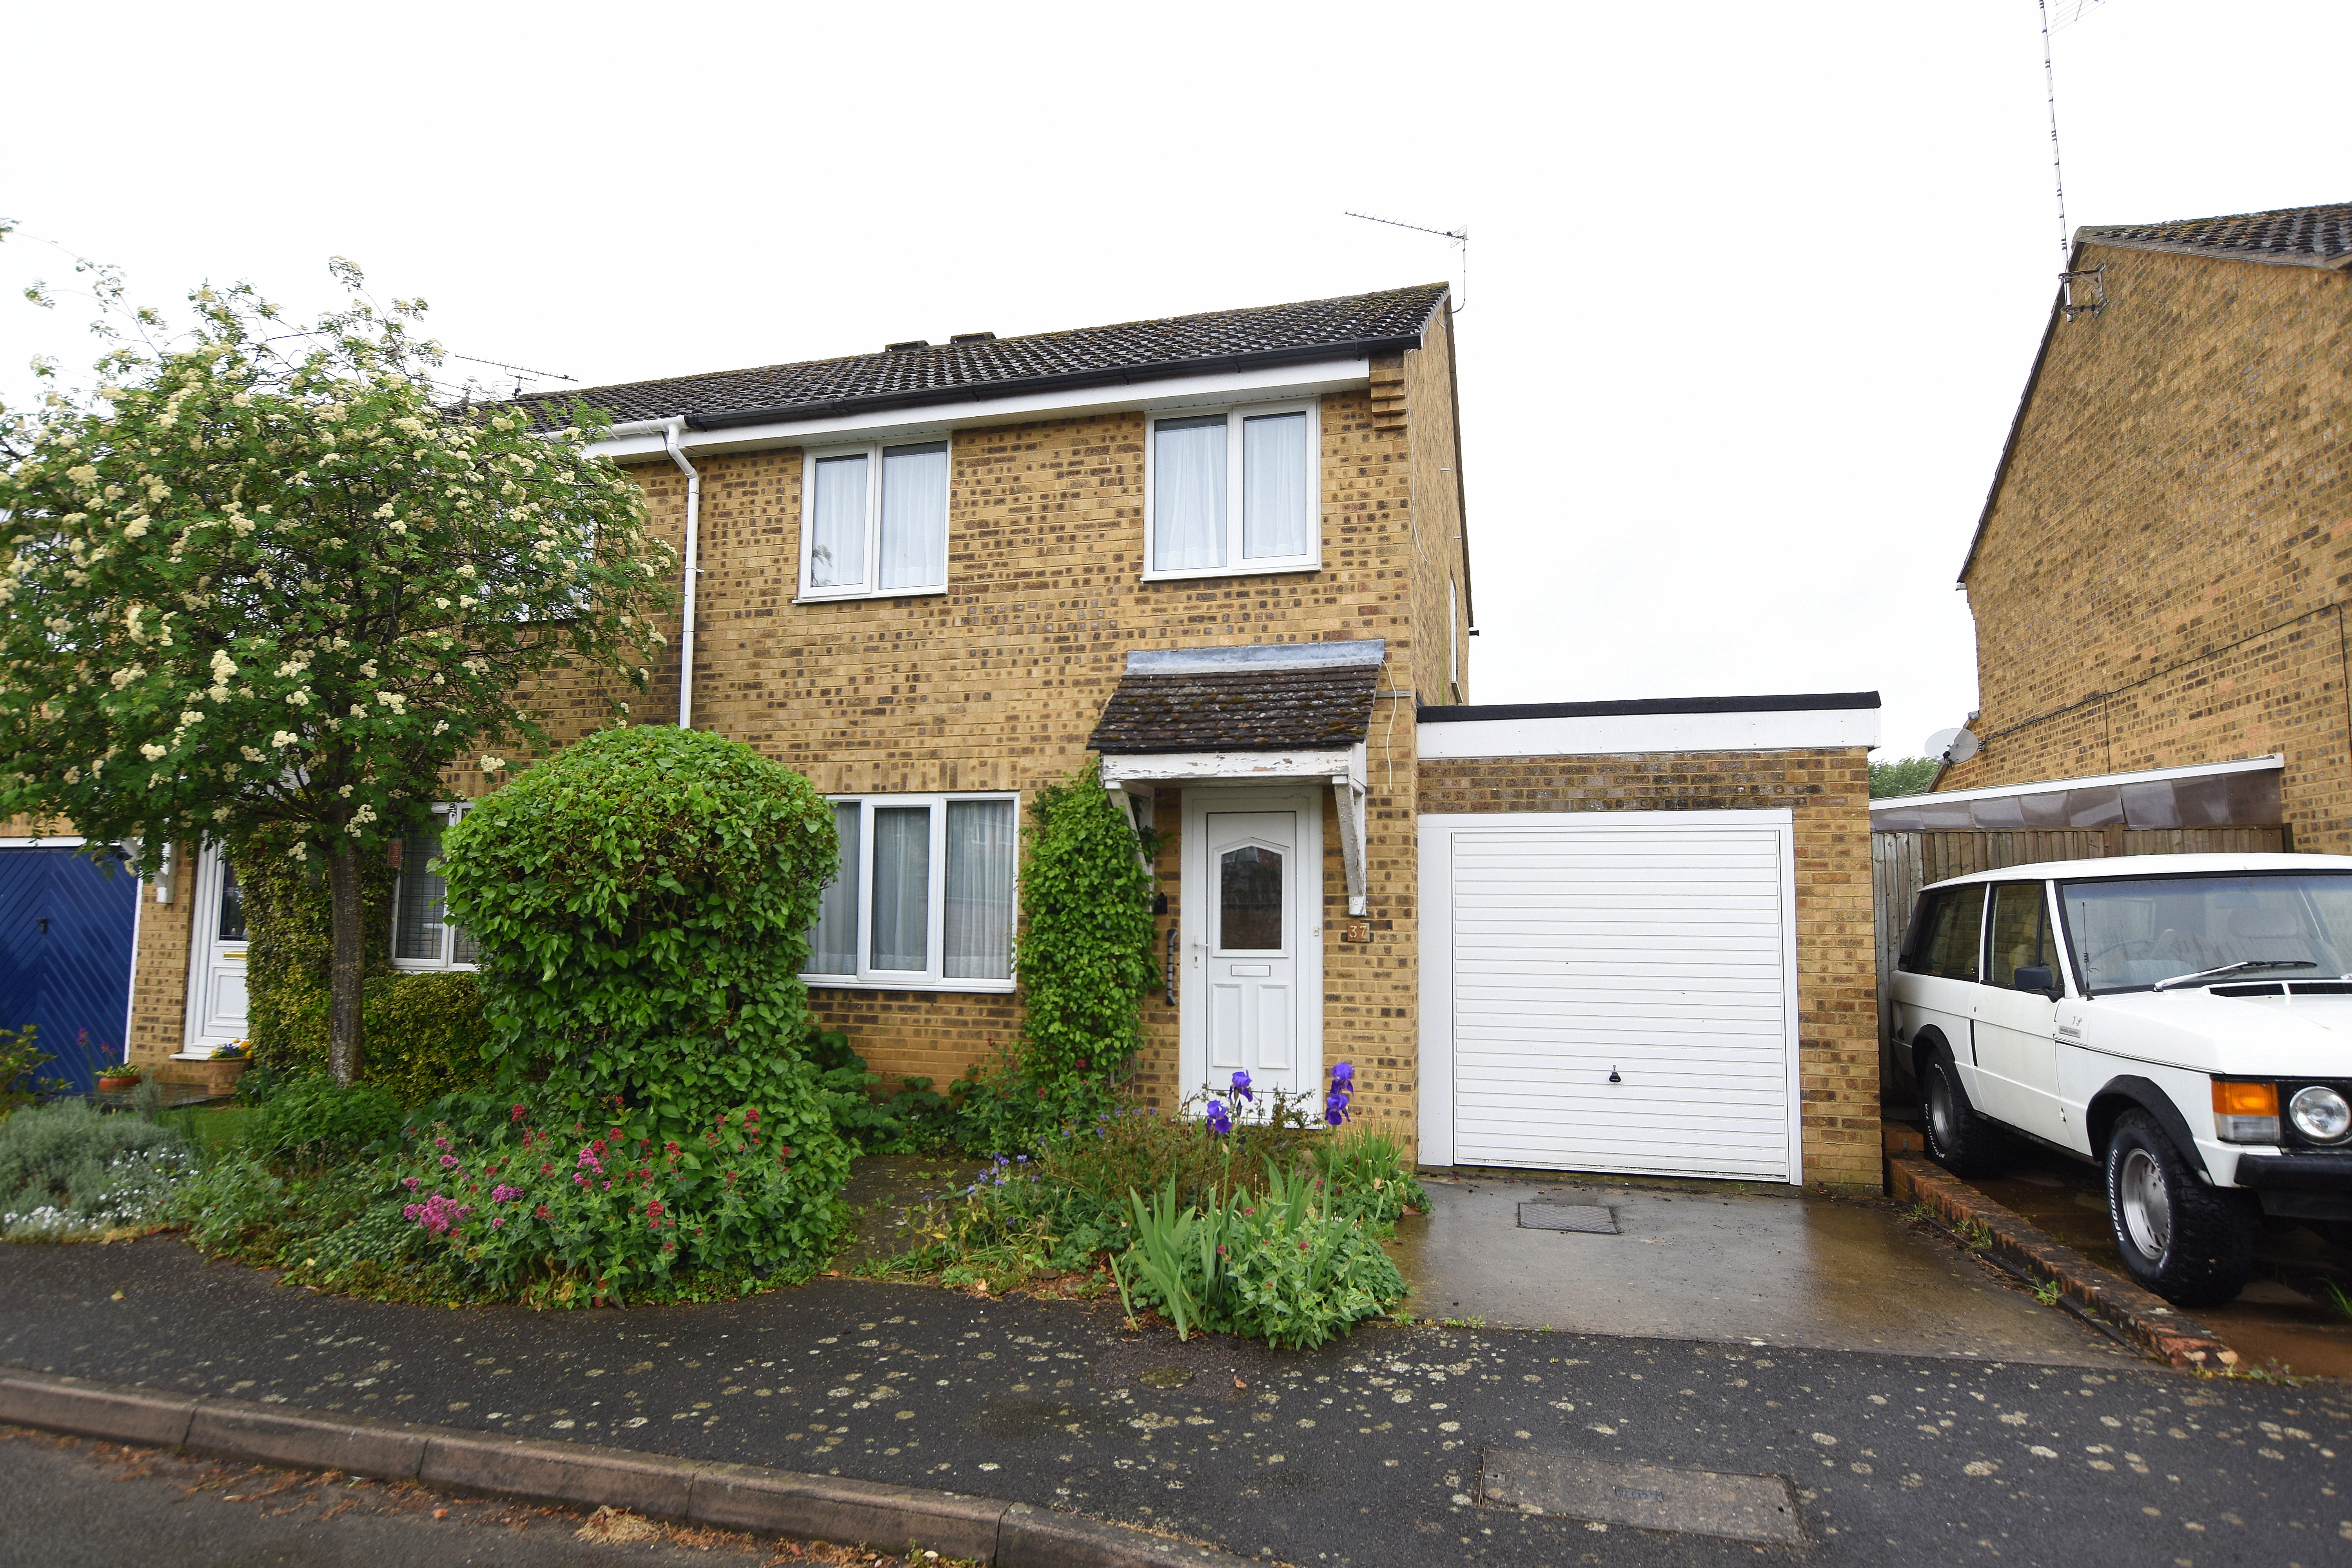 3 bed  for sale in Blenheim Rise, Kings Sutton  - Property Image 1